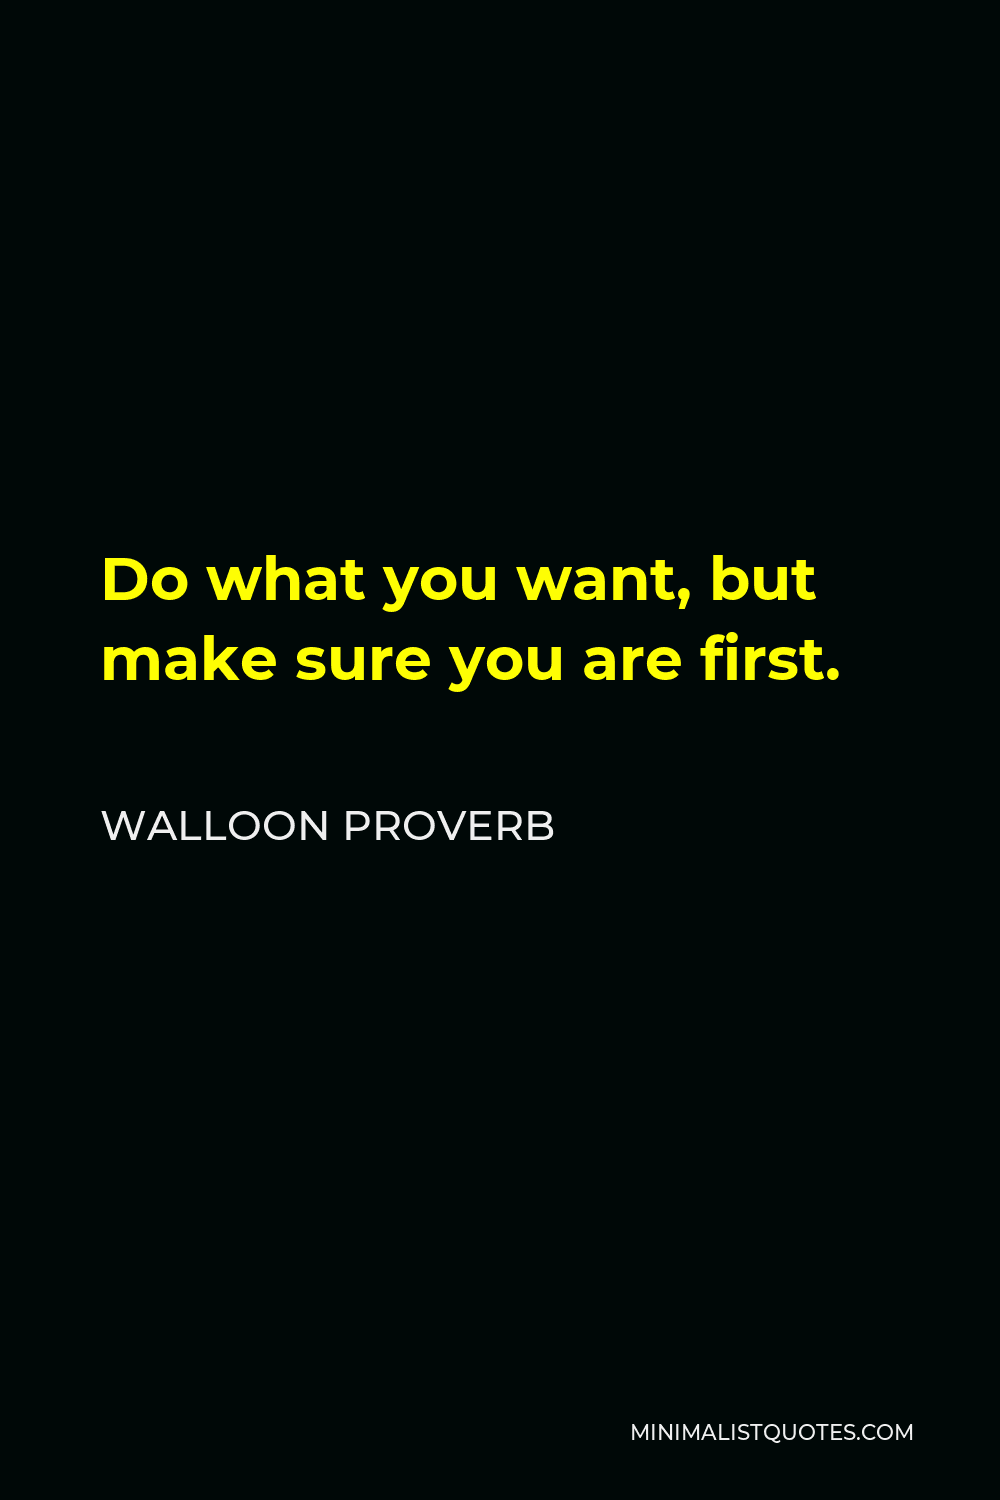 Walloon Proverb Quote - Do what you want, but make sure you are first.